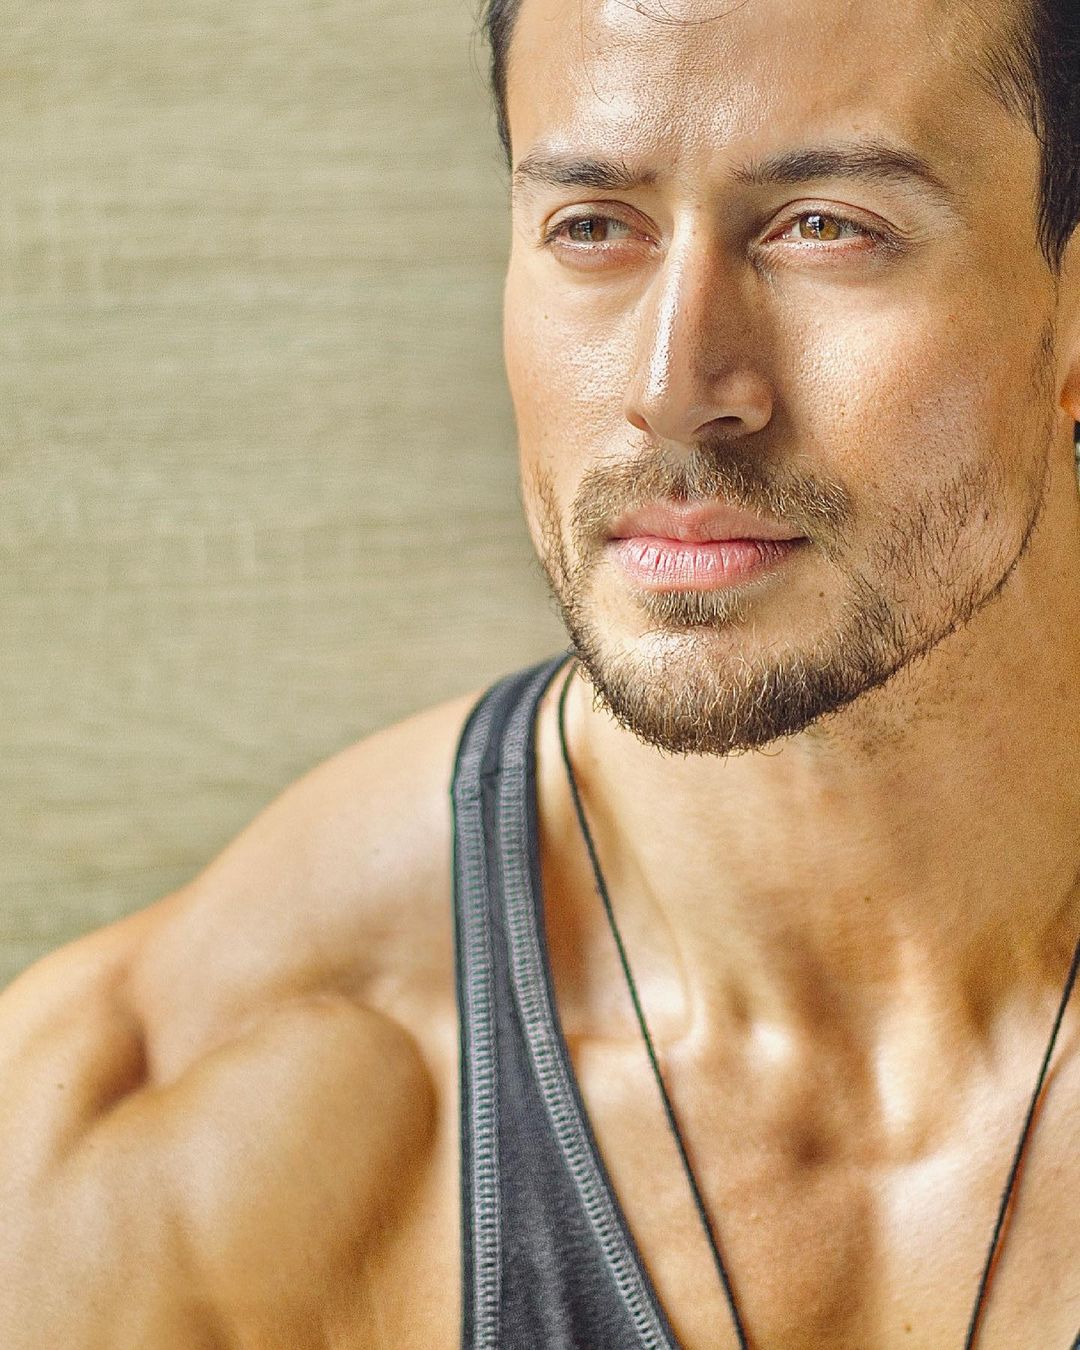 Tiger Shroff - (Indian Actor) - Age, Height, Net Worth, Biography